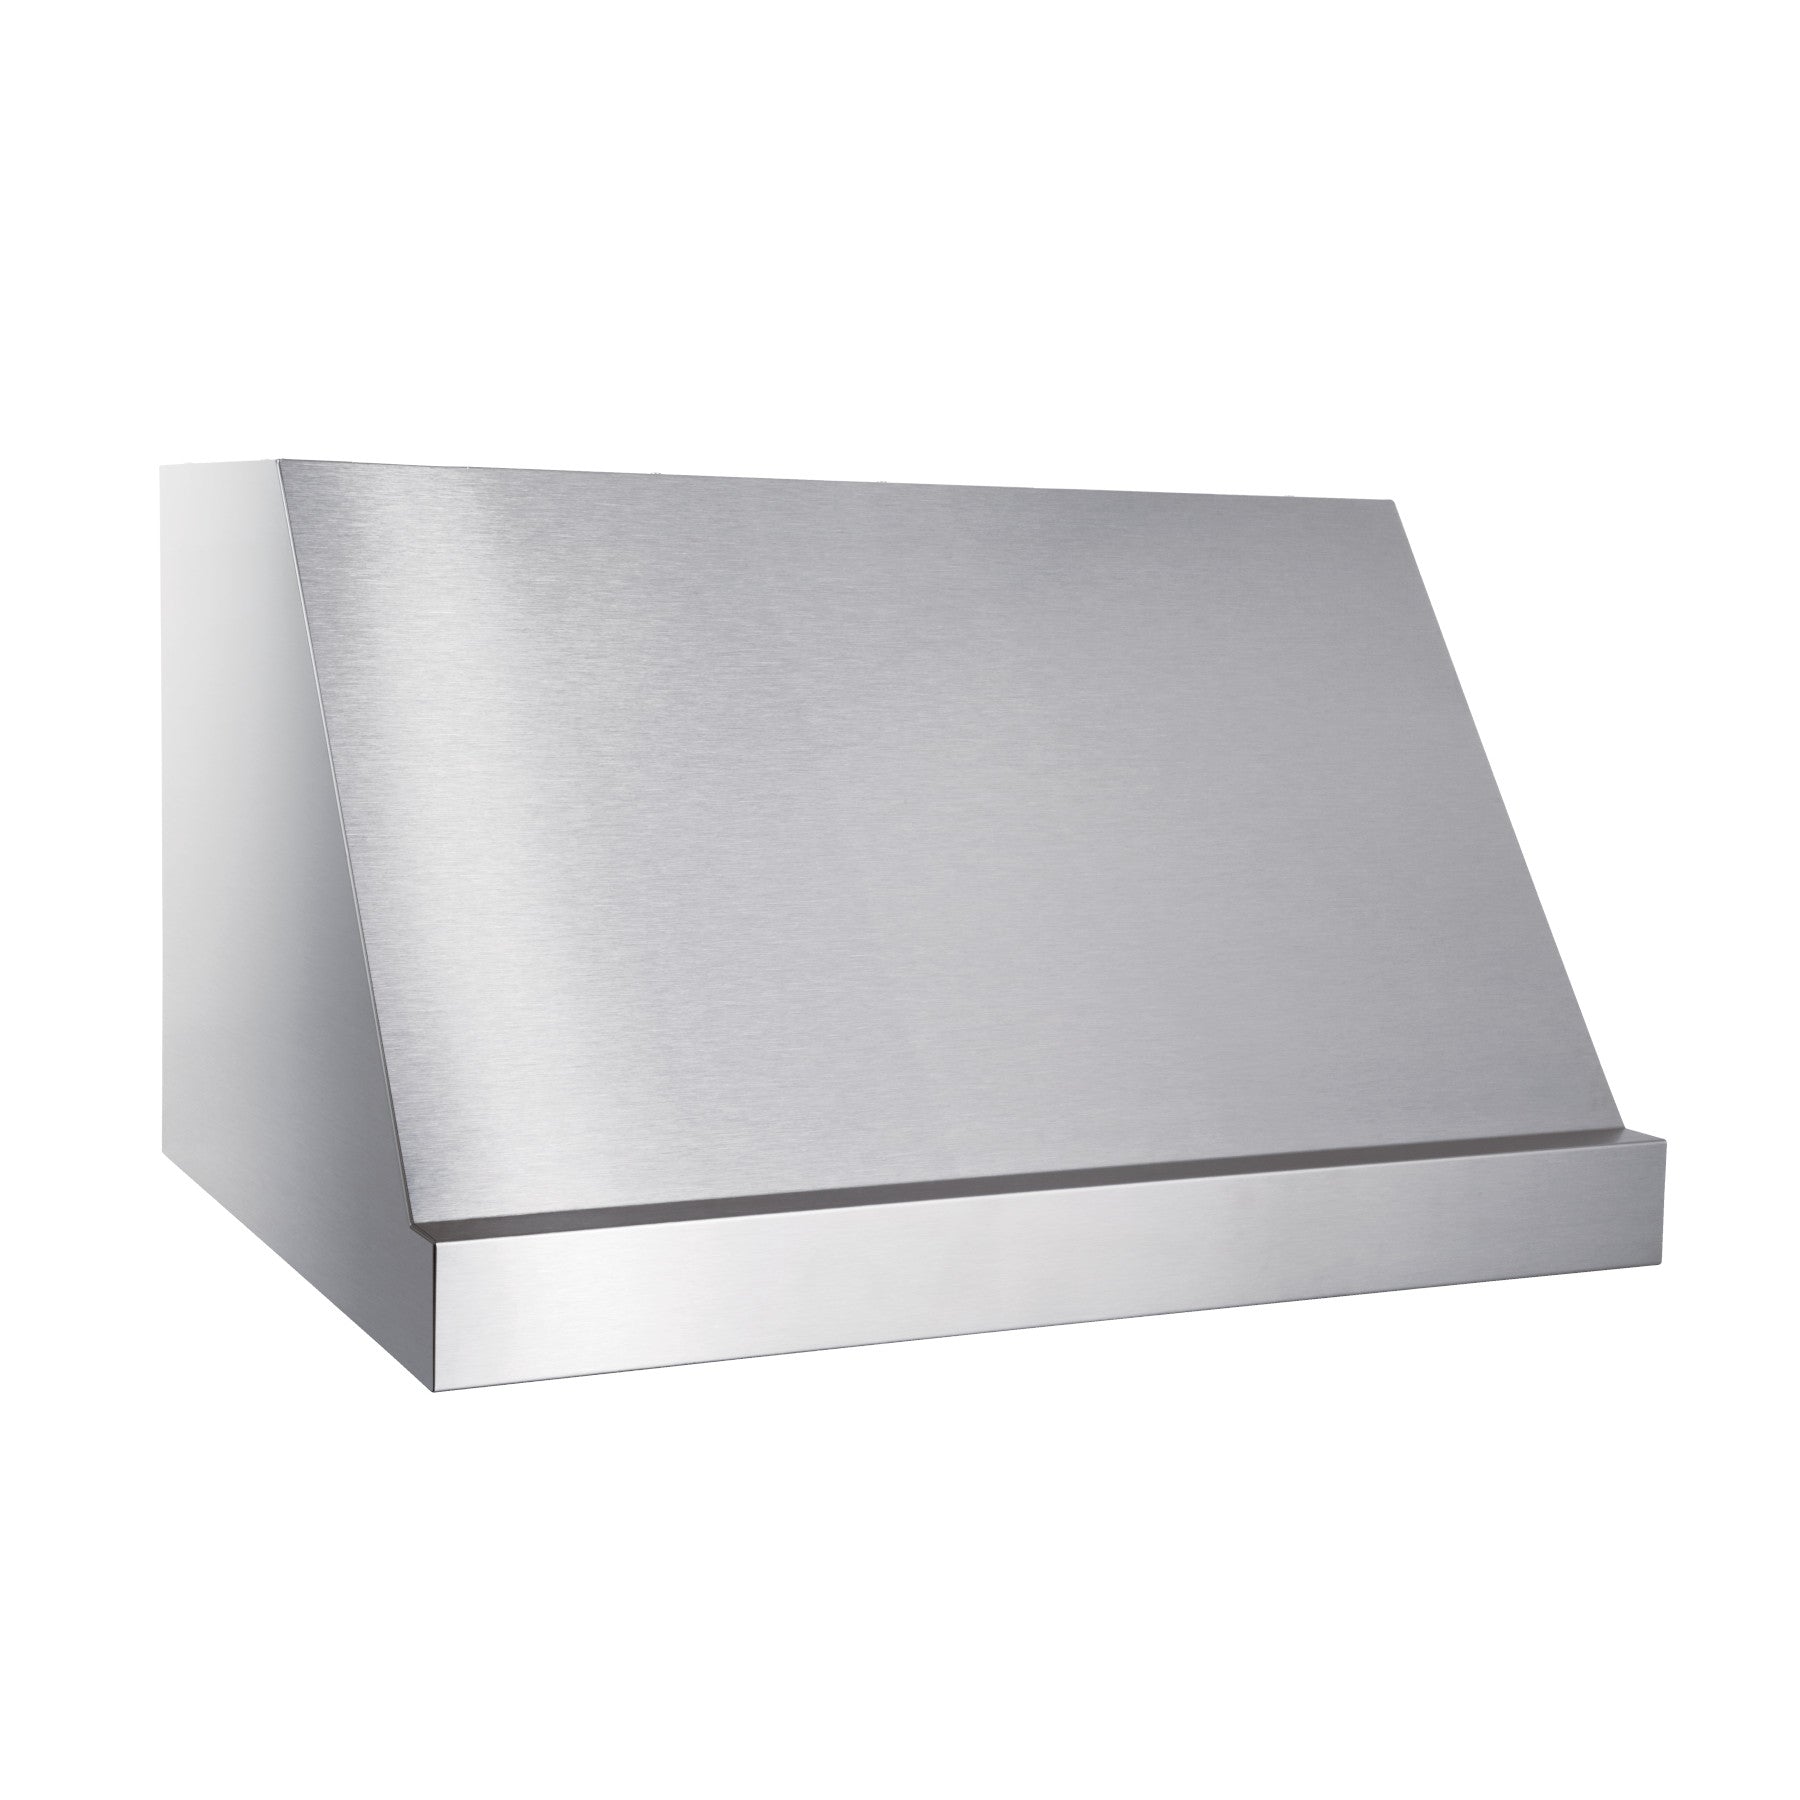 Best - 42 Inch Wall Mount and Chimney Range Vent in Stainless - WP28M42SB